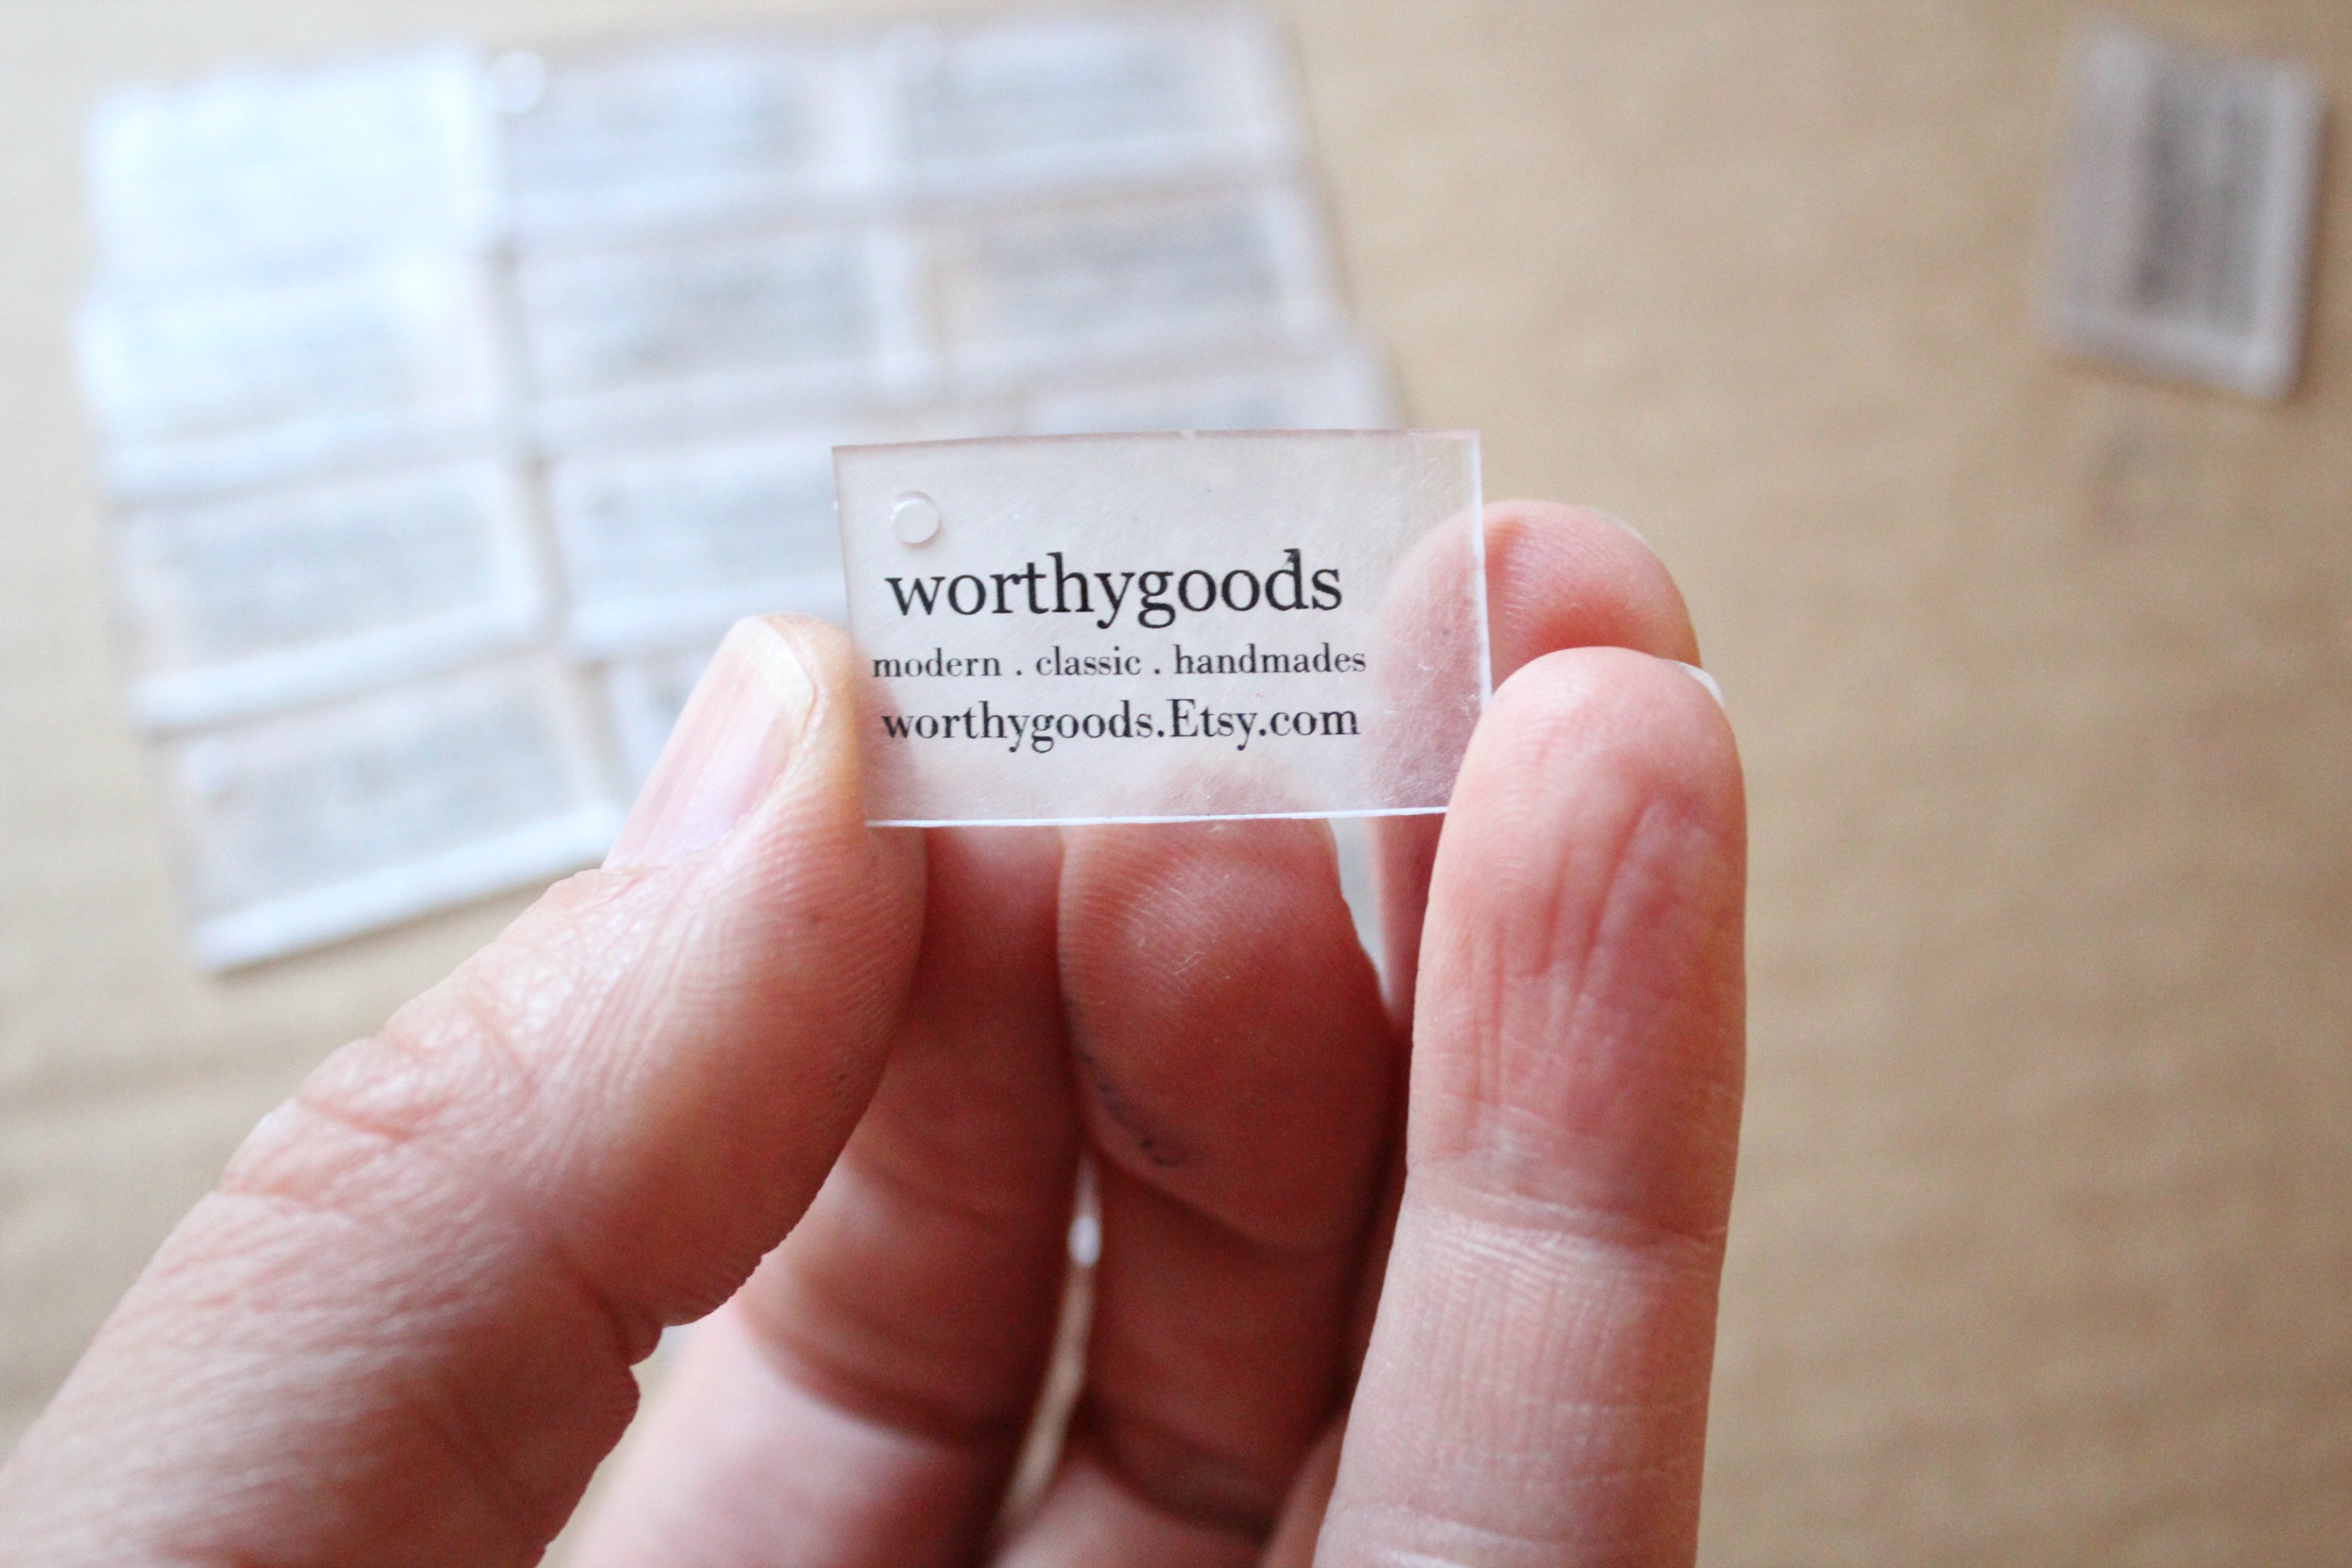 diy-product-tags-for-handmade-goods